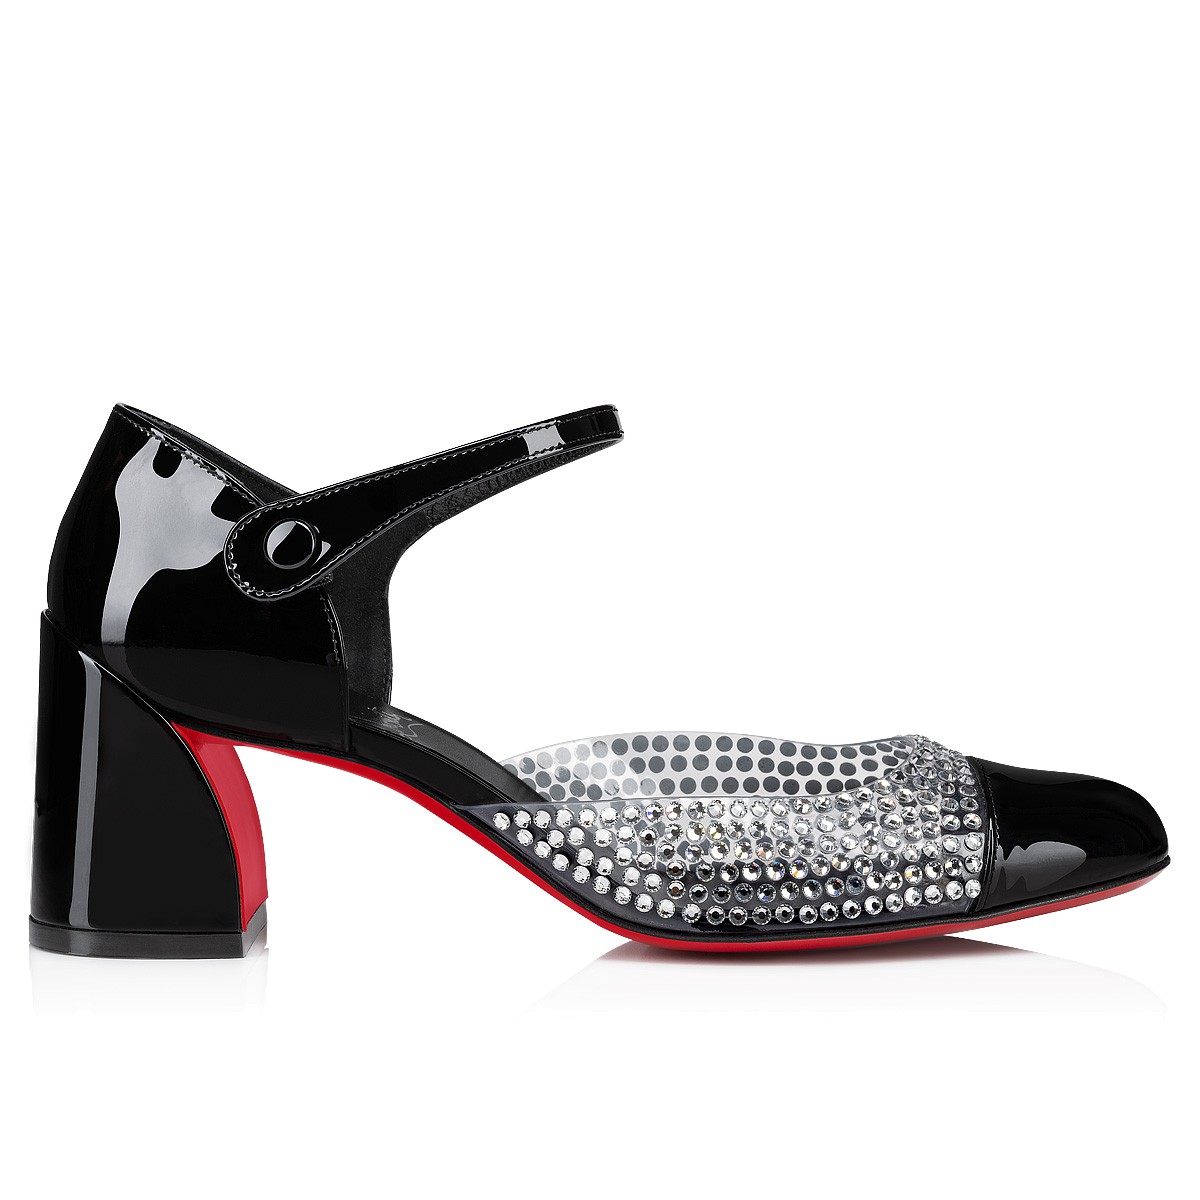 Shoes - Miss Mj Strass - Christian Louboutin